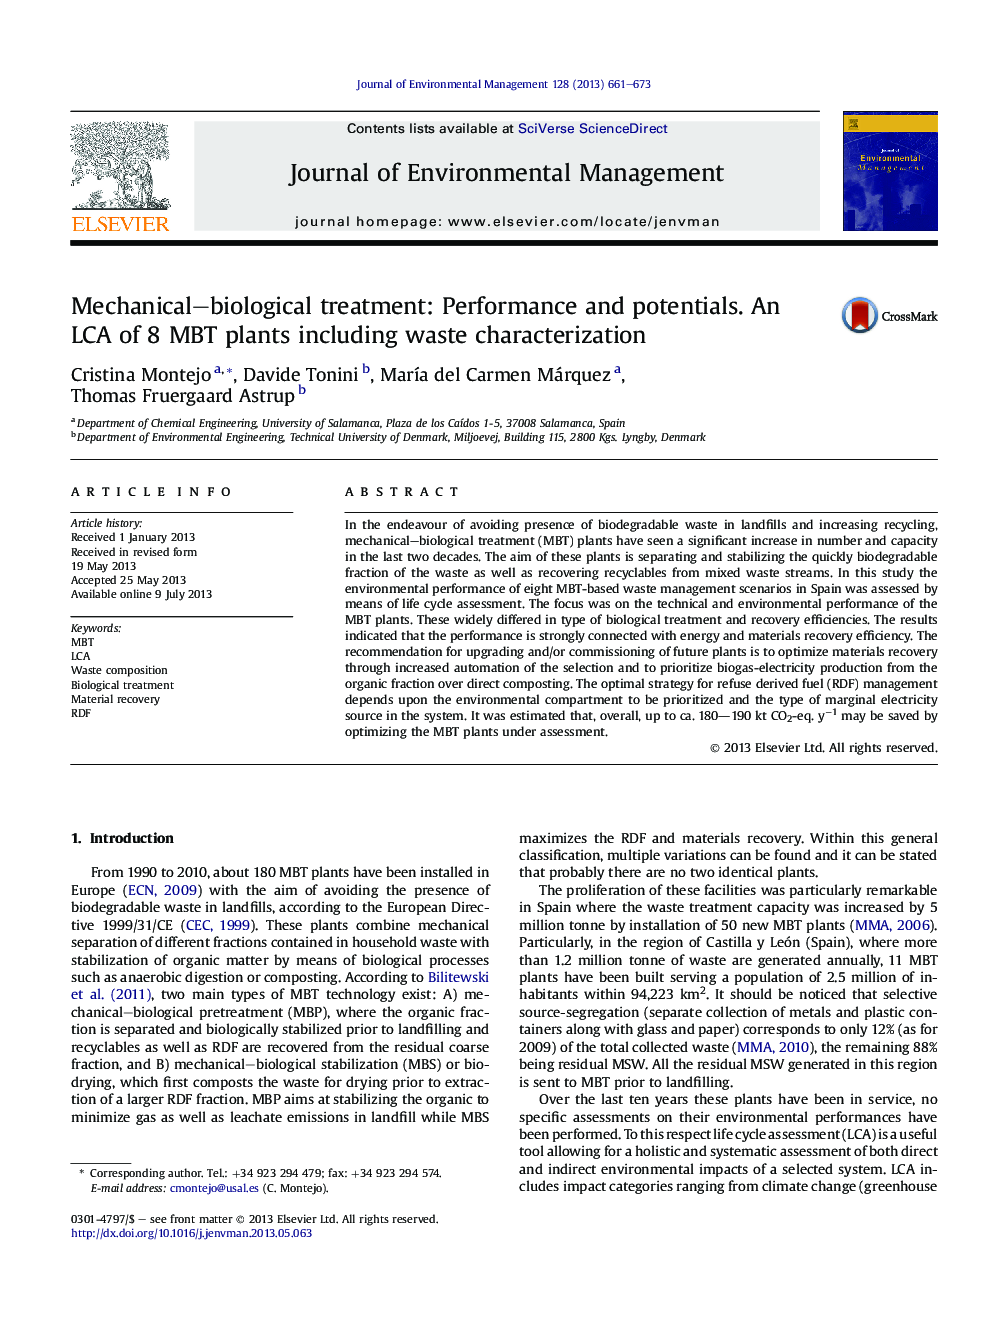 Mechanical-biological treatment: Performance and potentials. An LCA of 8 MBT plants including waste characterization